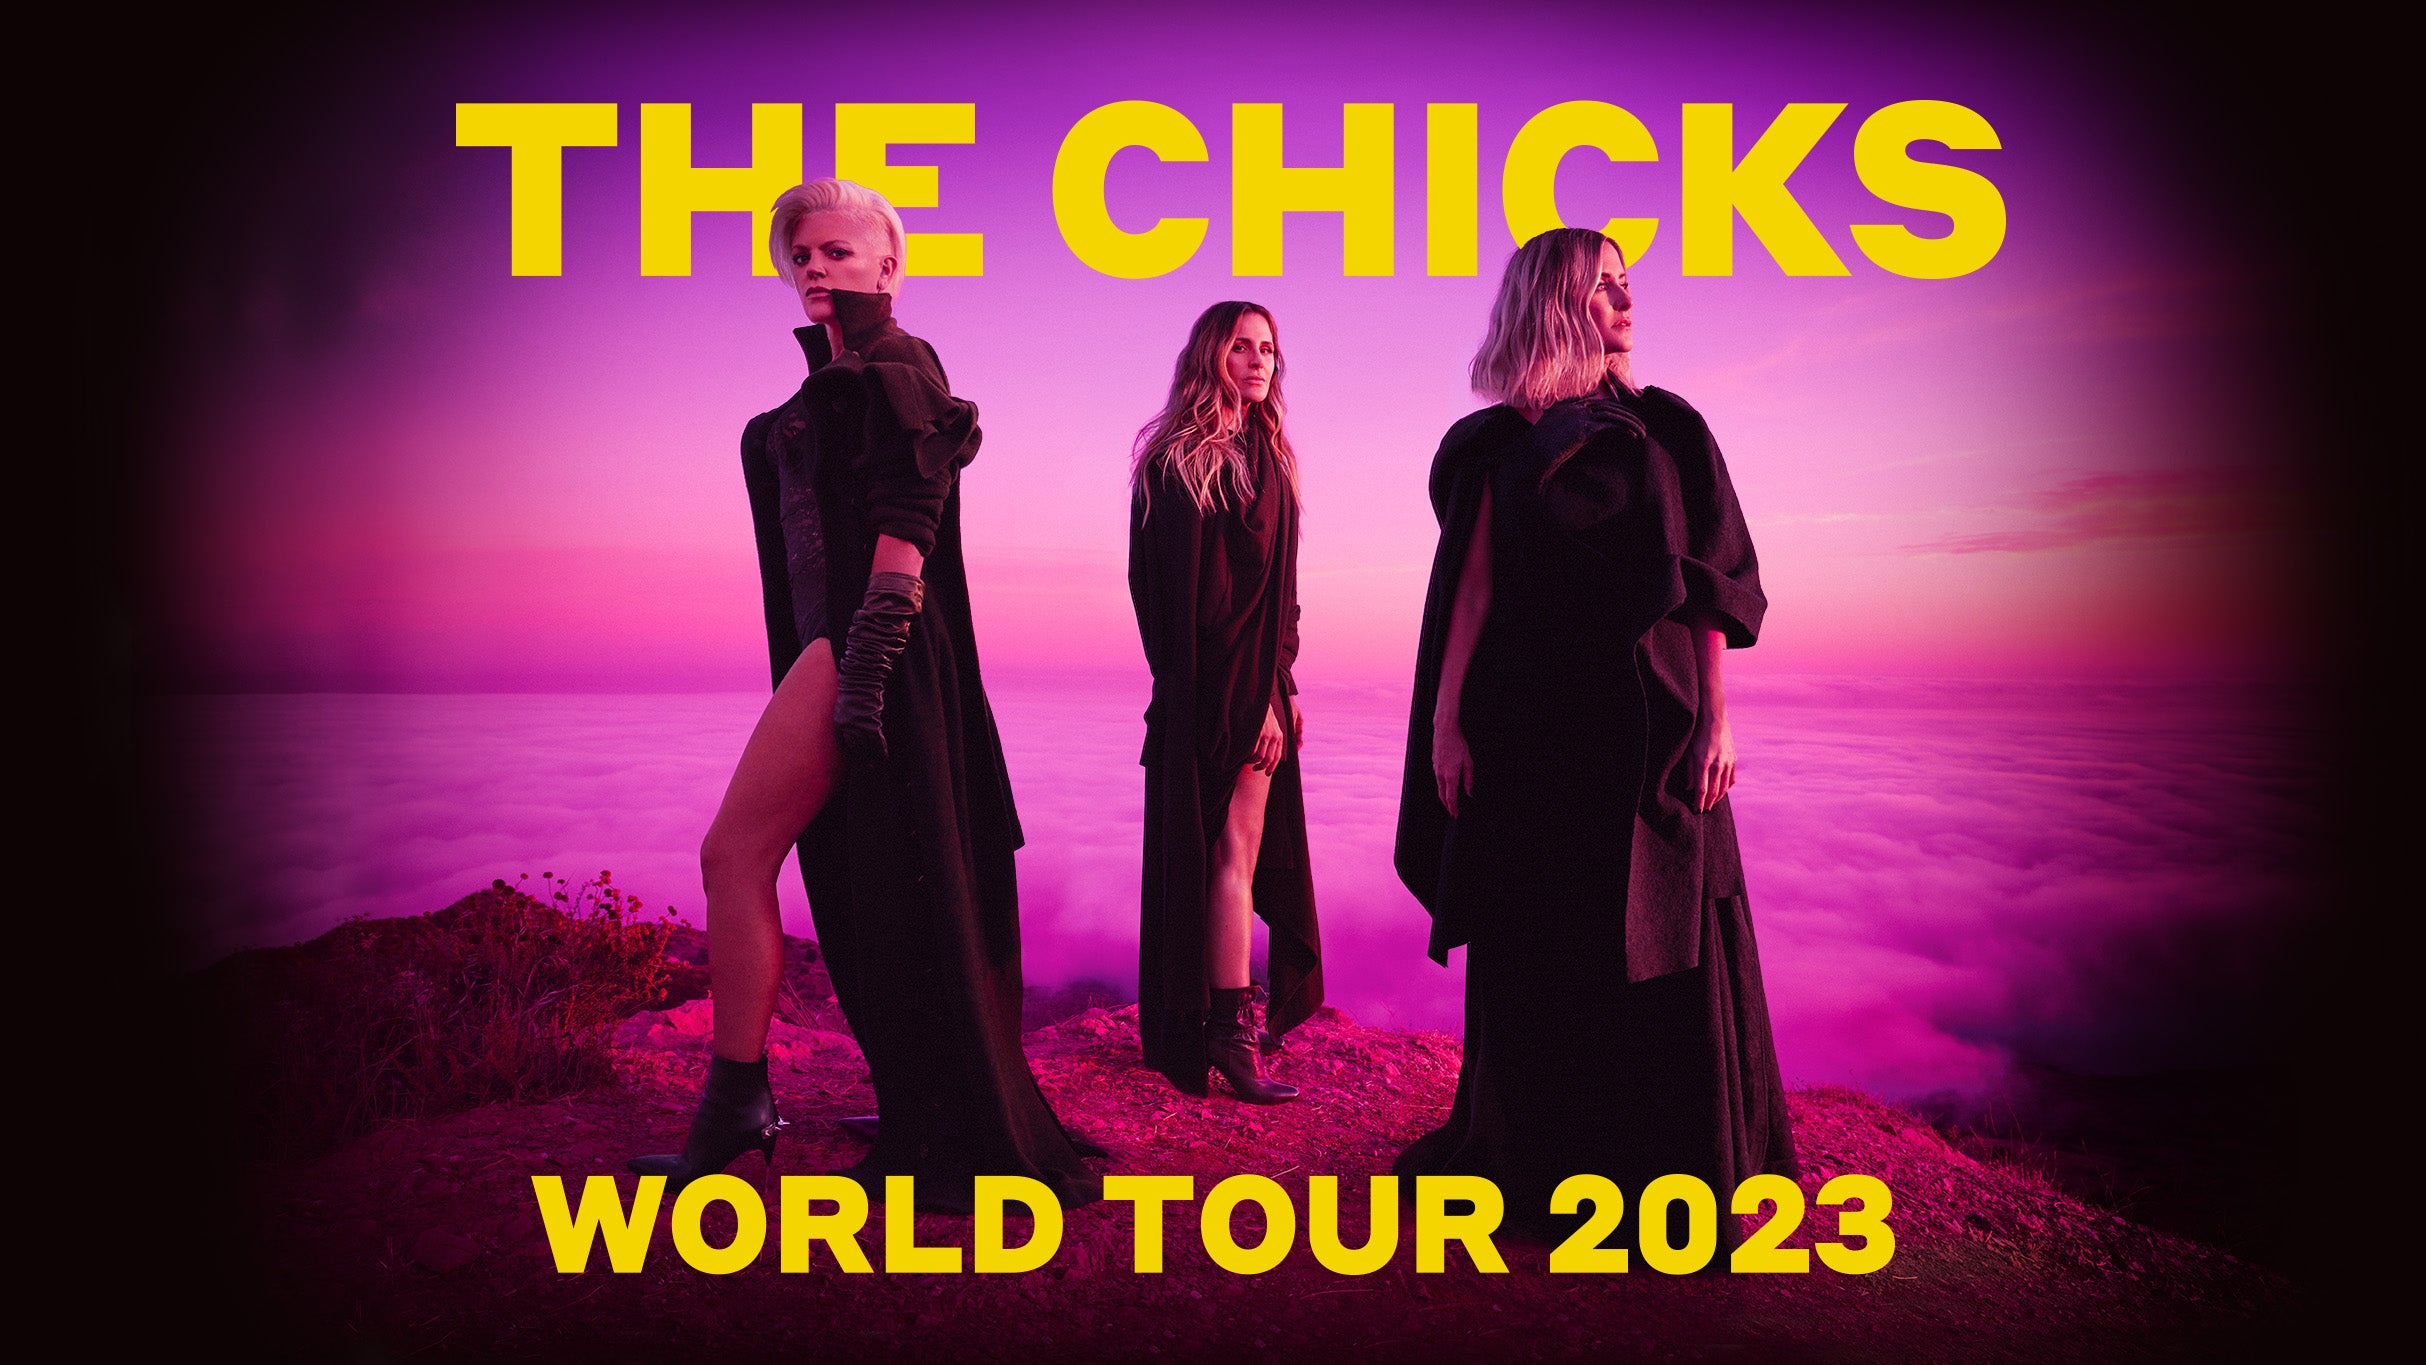 Image used with permission from Ticketmaster | a day on the green - The Chicks (Reserved and GA) tickets